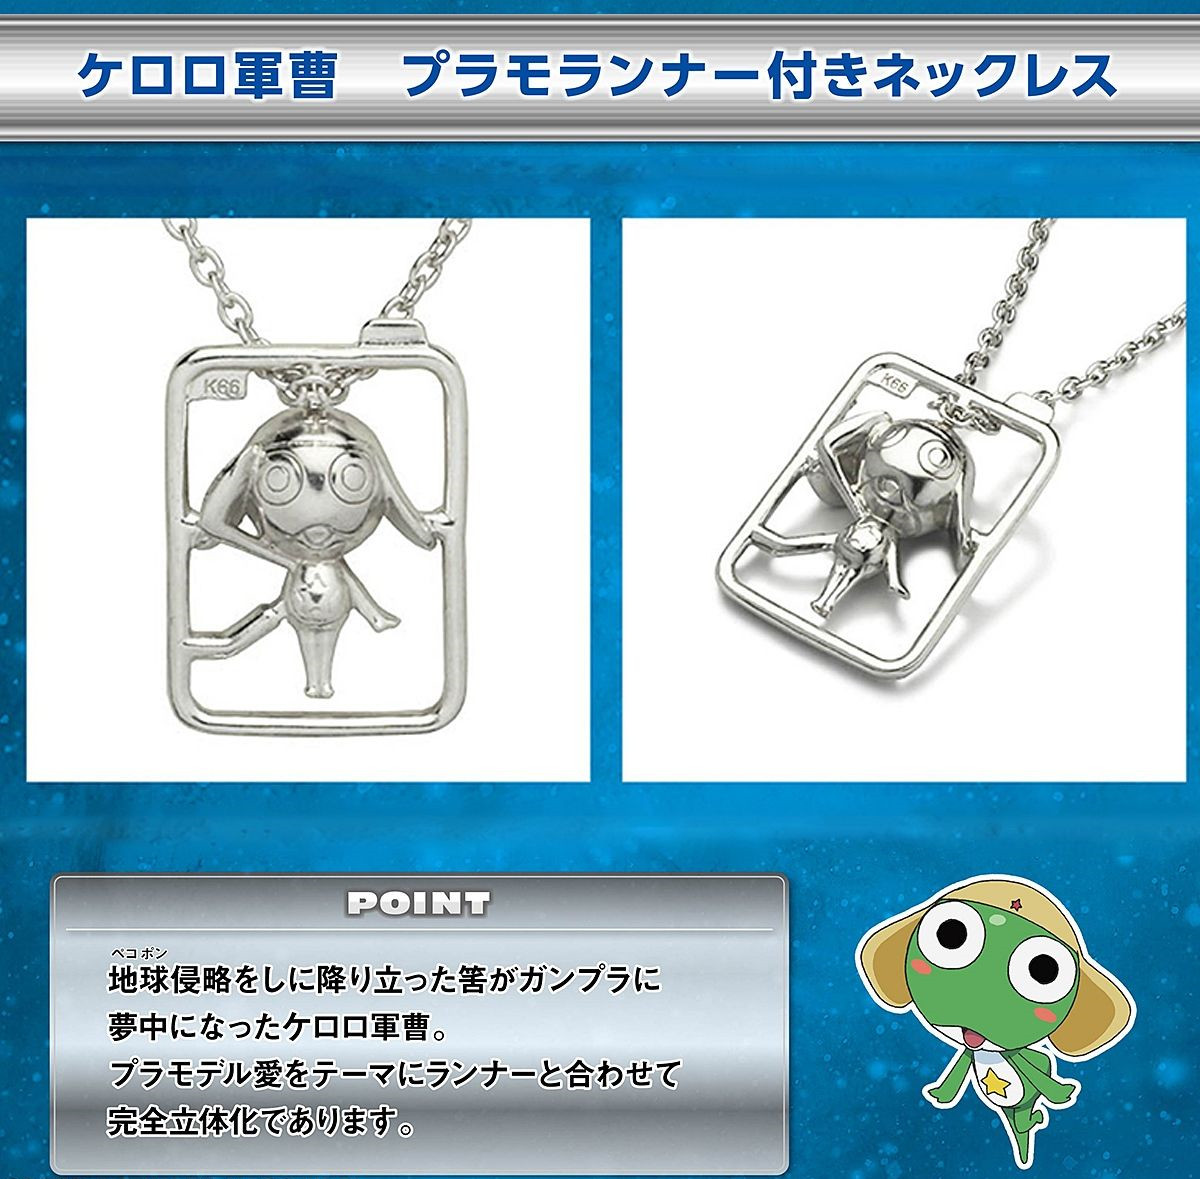 Keroro Necklace with Plastic-Model Runner—Sgt. Frog (Keroro Gunso)/JAM HOME MADE Collaboration